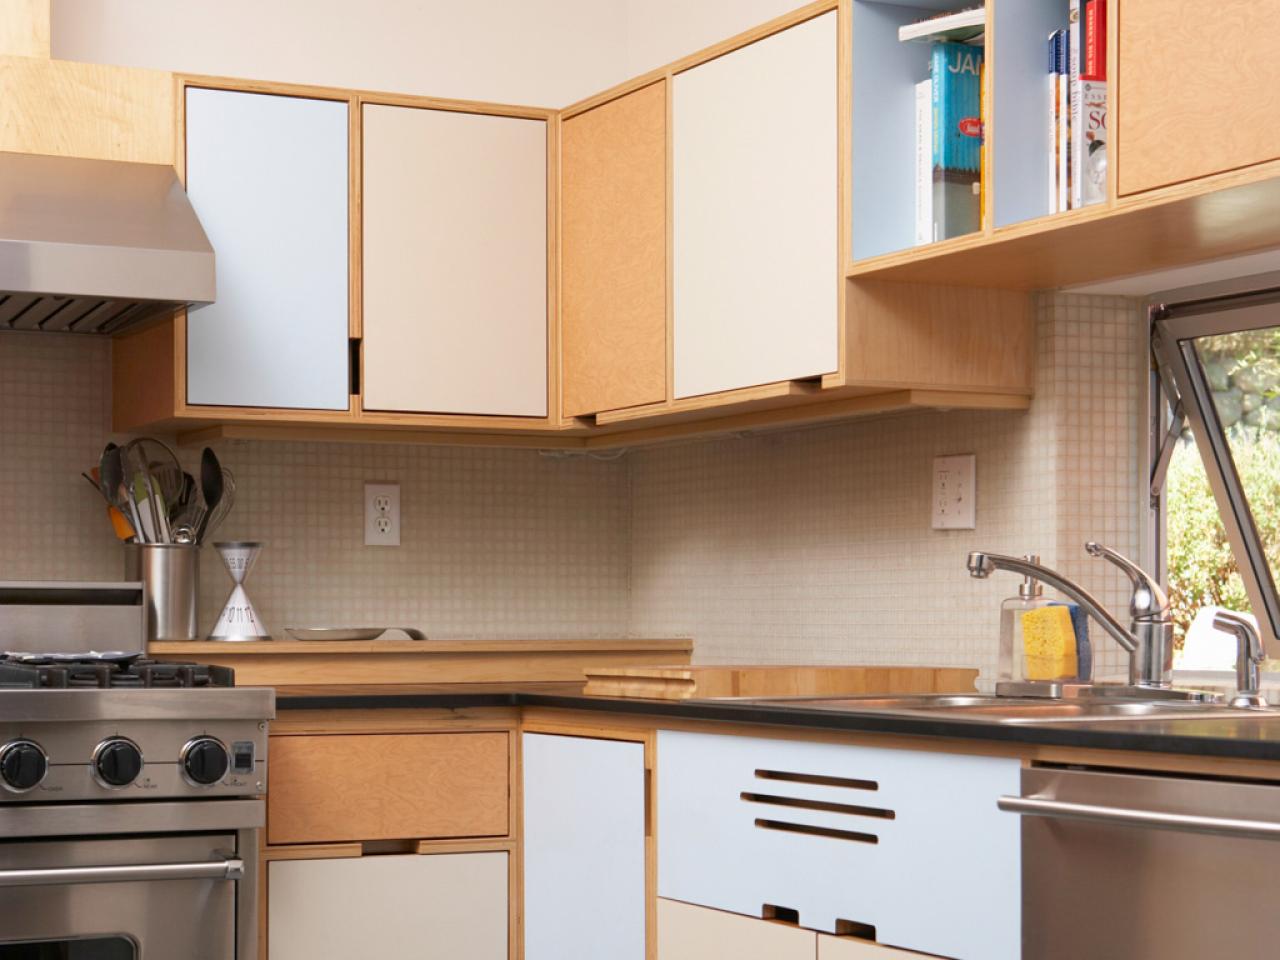 Unfinished Kitchen Cabinets Pictures Ideas From Hgtv Hgtv